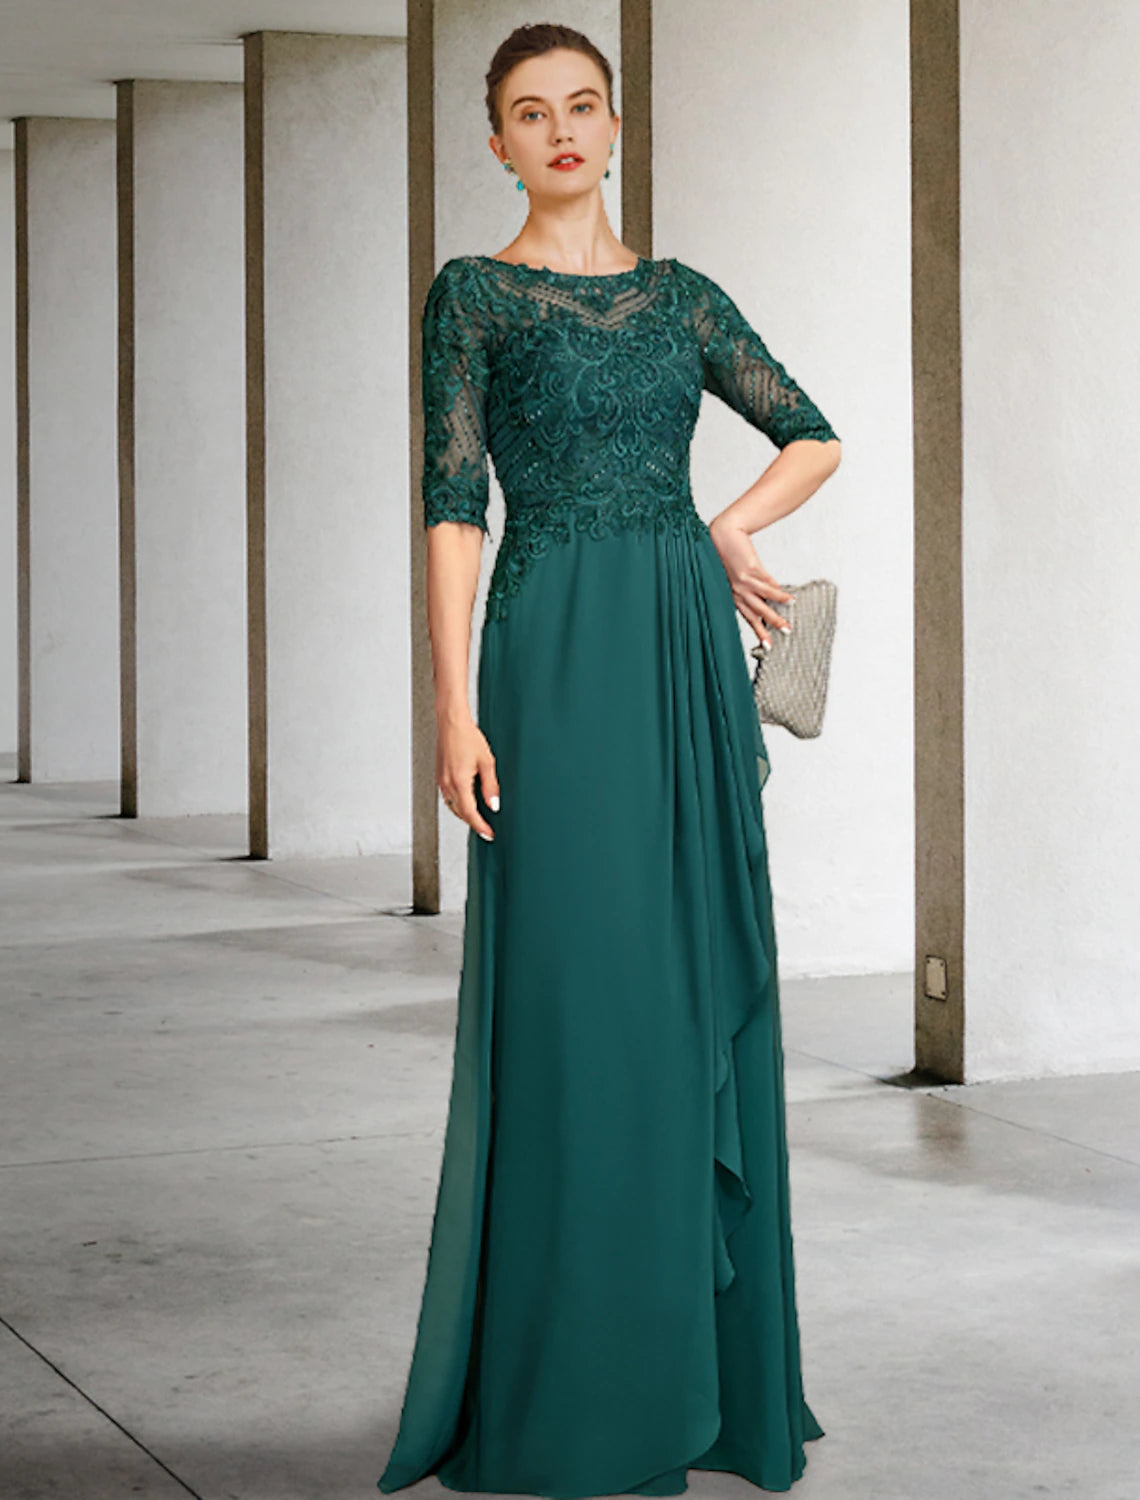 Mother of the Bride Dress Luxurious Elegant Jewel Neck Floor Length Chiffon Lace Half Sleeve with Pleats Beading AppliquesA-Line Mother of the Bride Dress Luxurious Elegant Jewel Neck Floor Length Chiffon Lace Half Sleeve with Pleats Beading Appliques